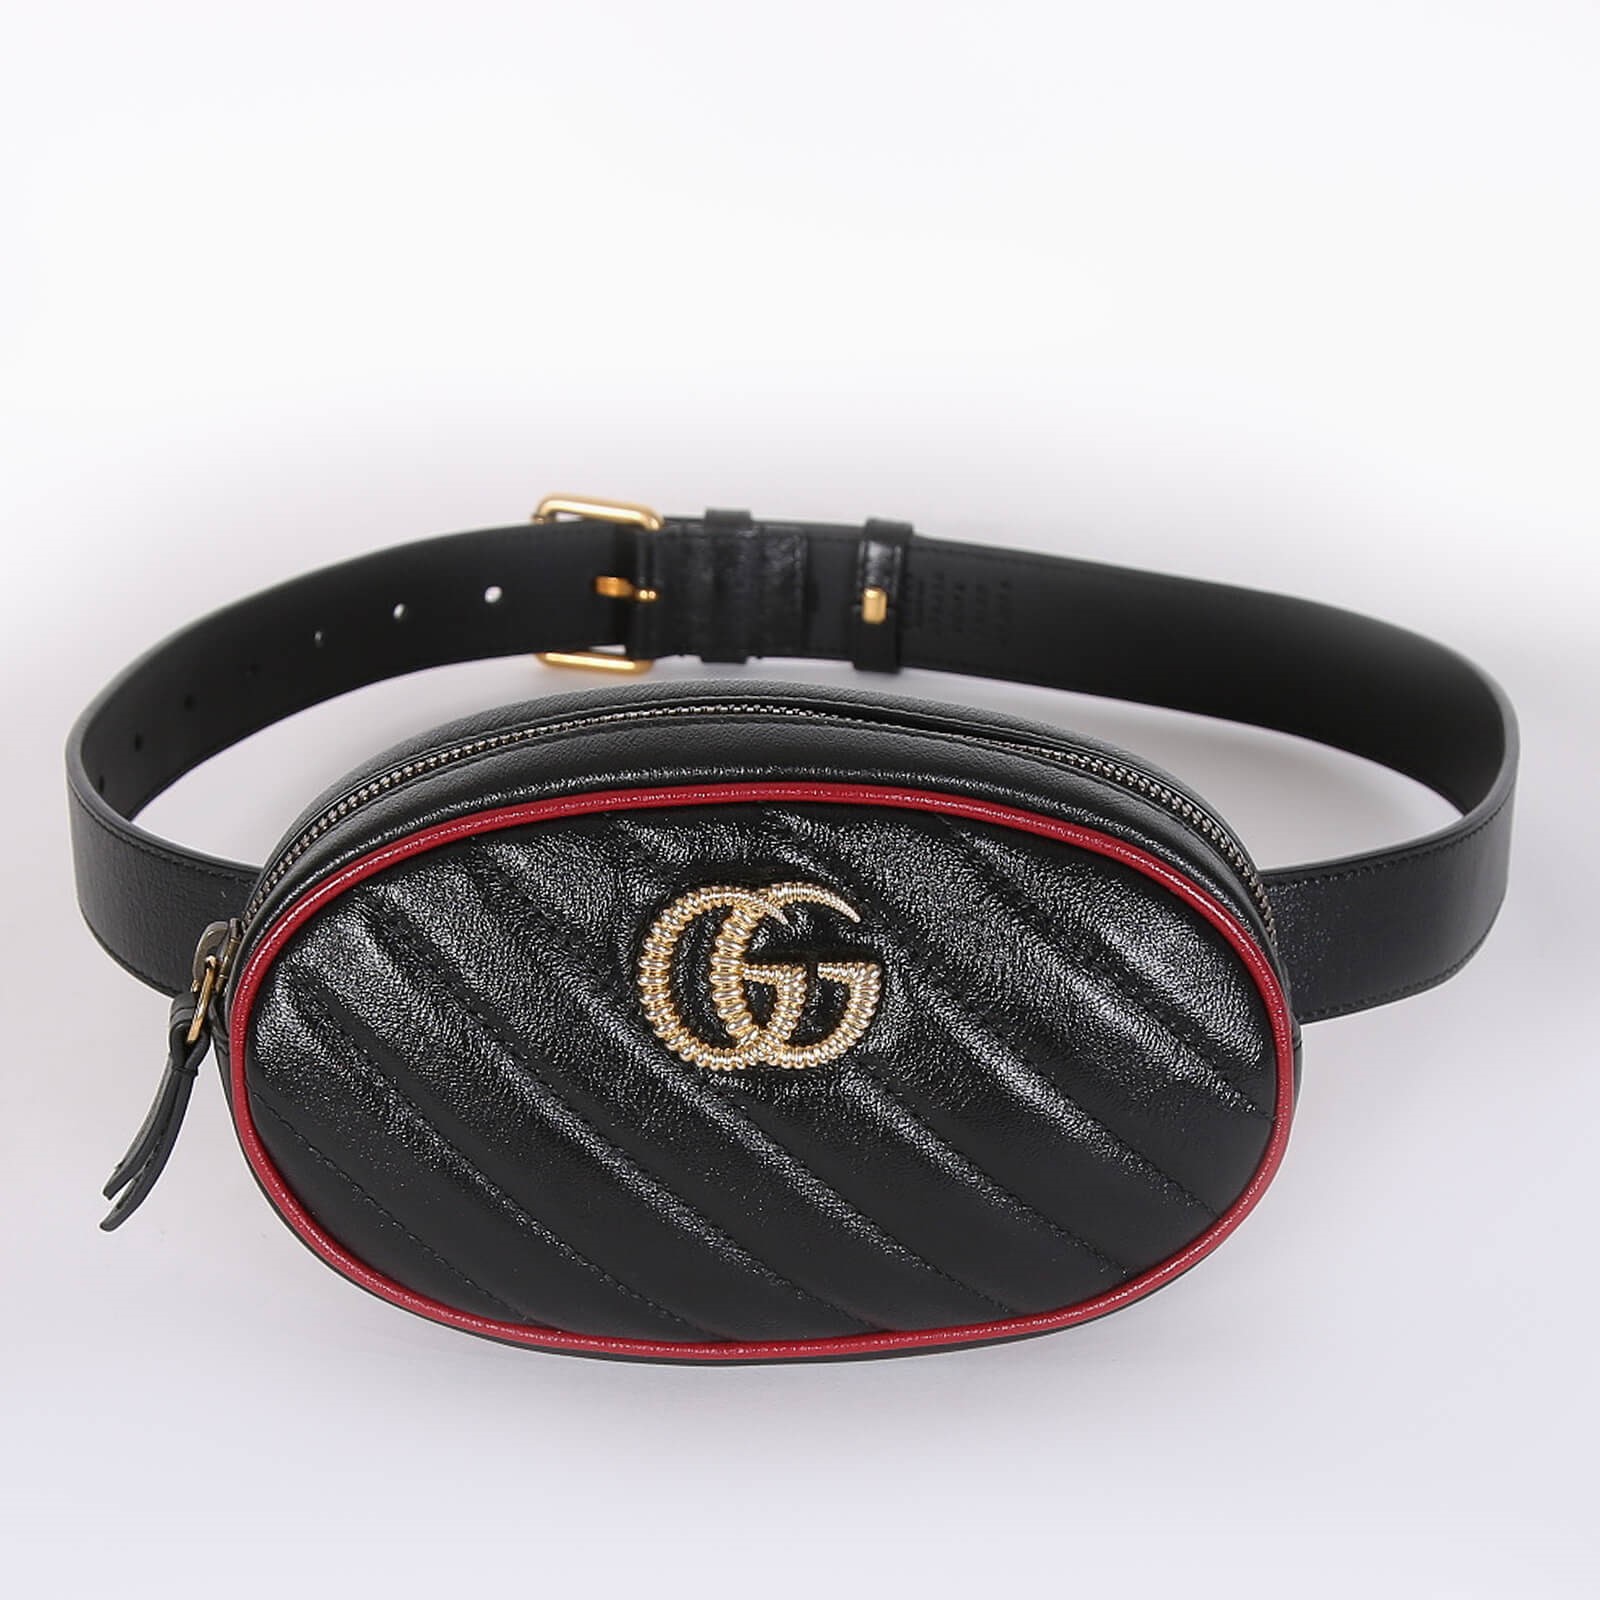 Gucci Marmont Quilted Leather Belt Black, Leather Belt